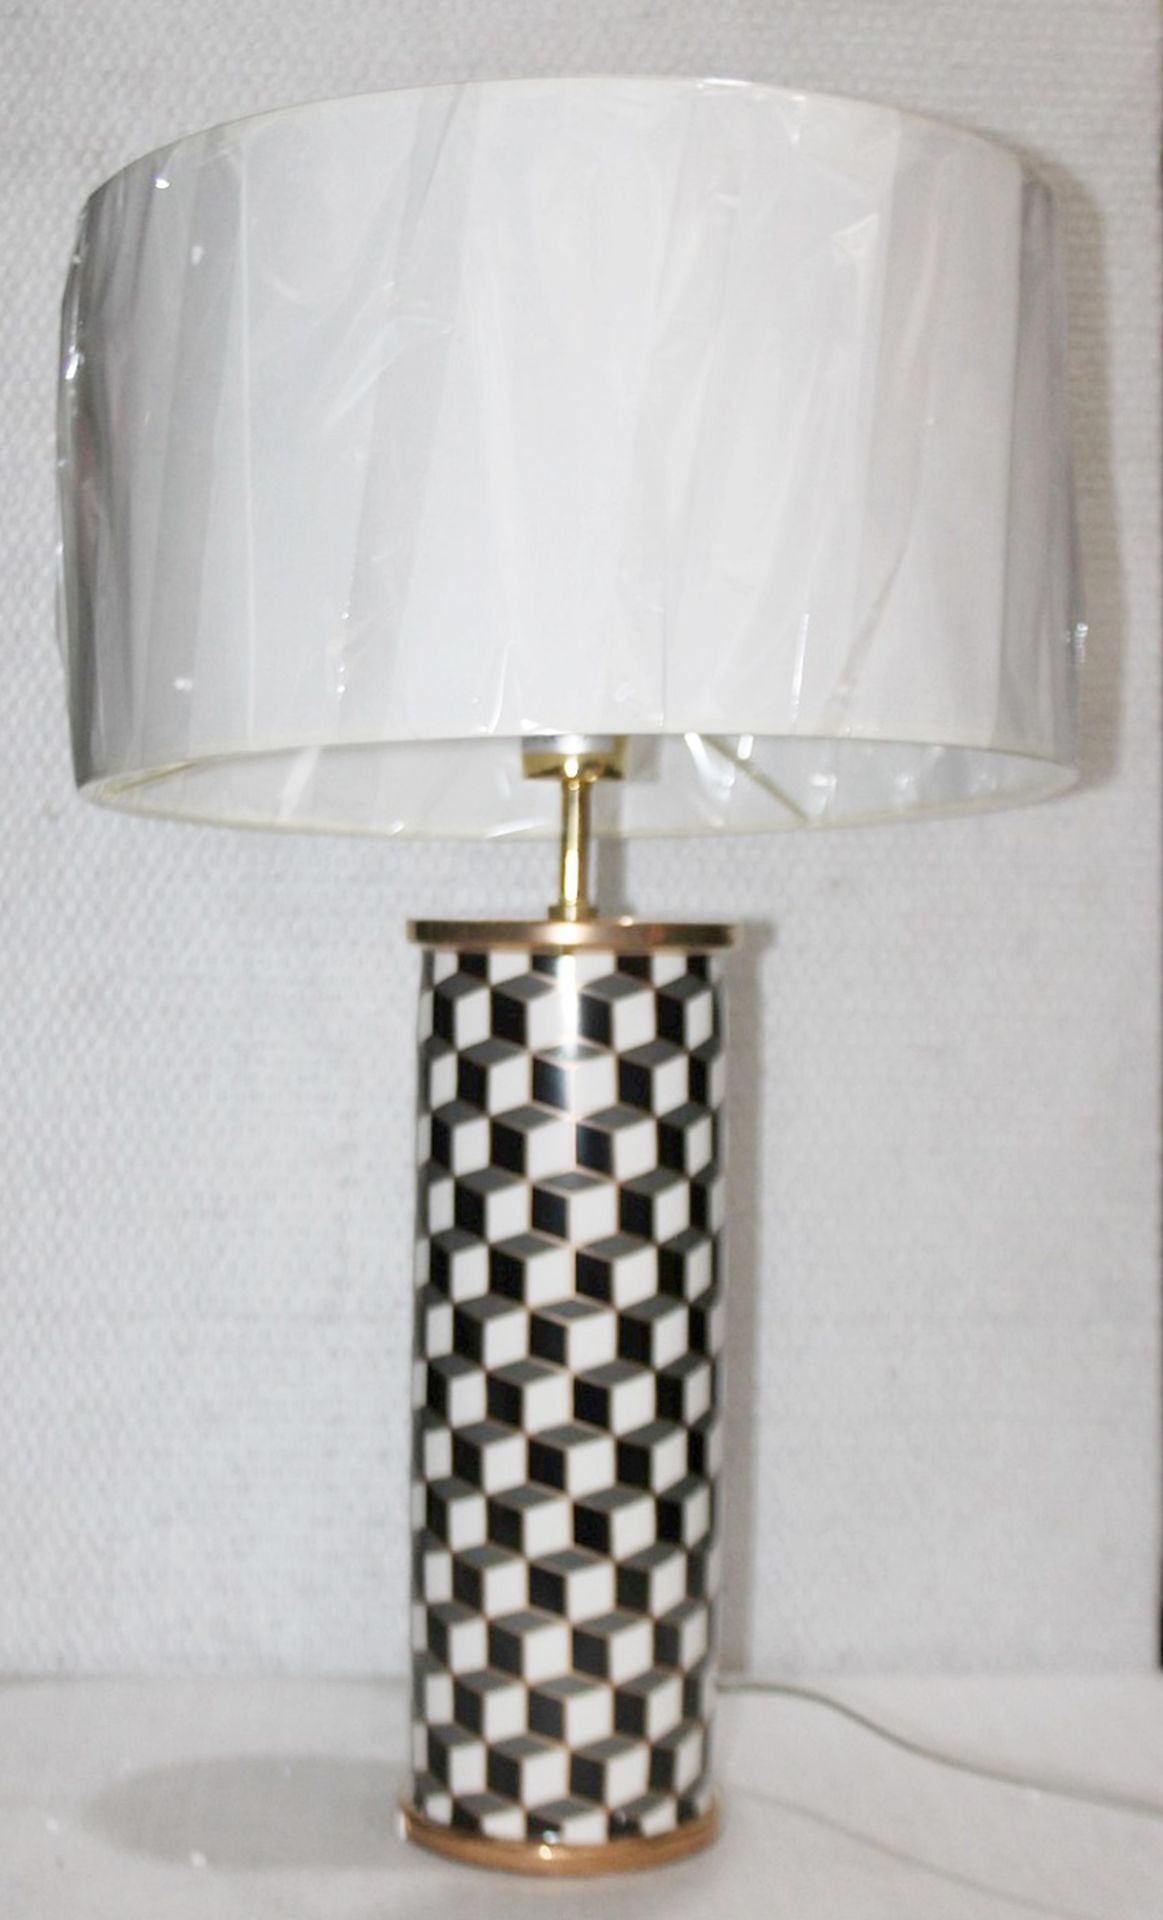 1 x JONATHAN ADLER 'Carnaby' Designer Table Lamp With Shade - Original Price £495.00 - Boxed Stock - Image 2 of 11